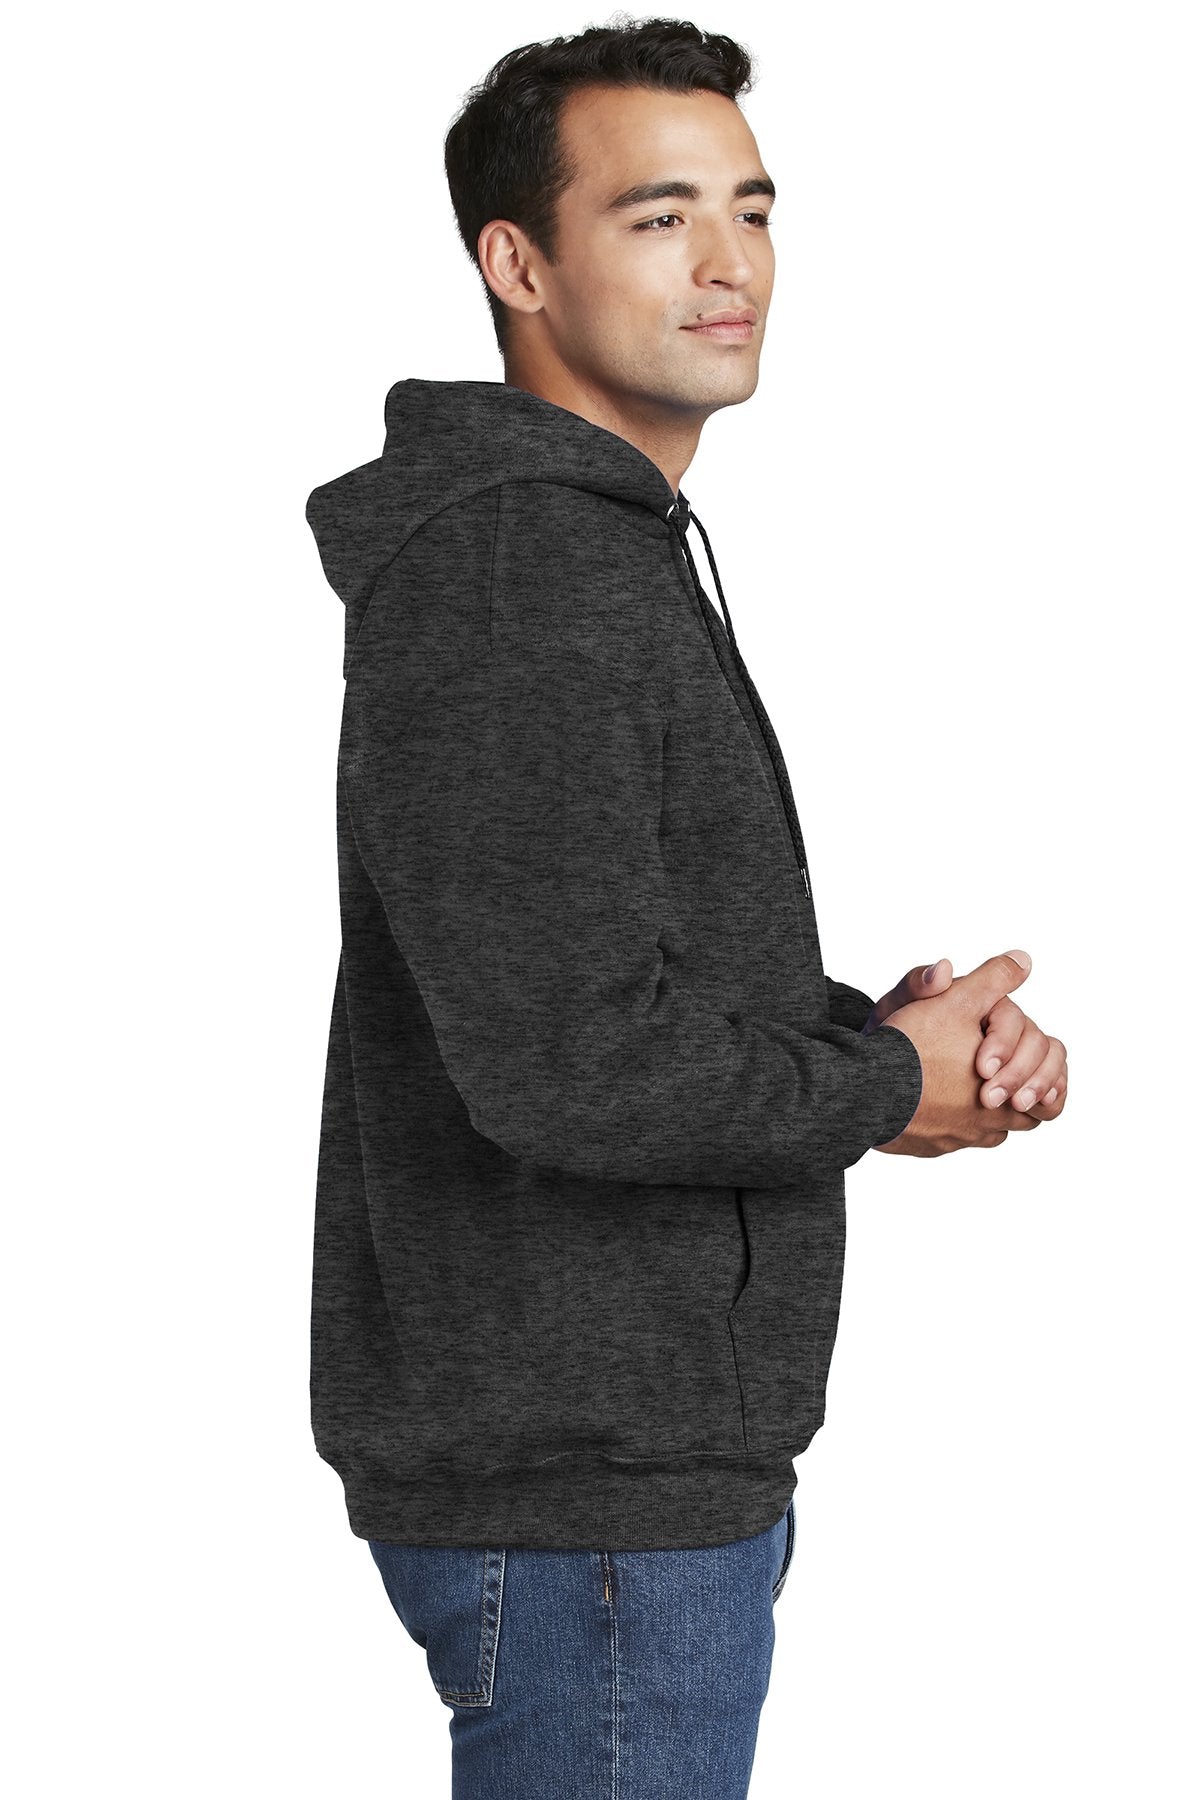 Hanes Ultimate Cotton Pullover Hooded Sweatshirt F170 Charcoal Heather